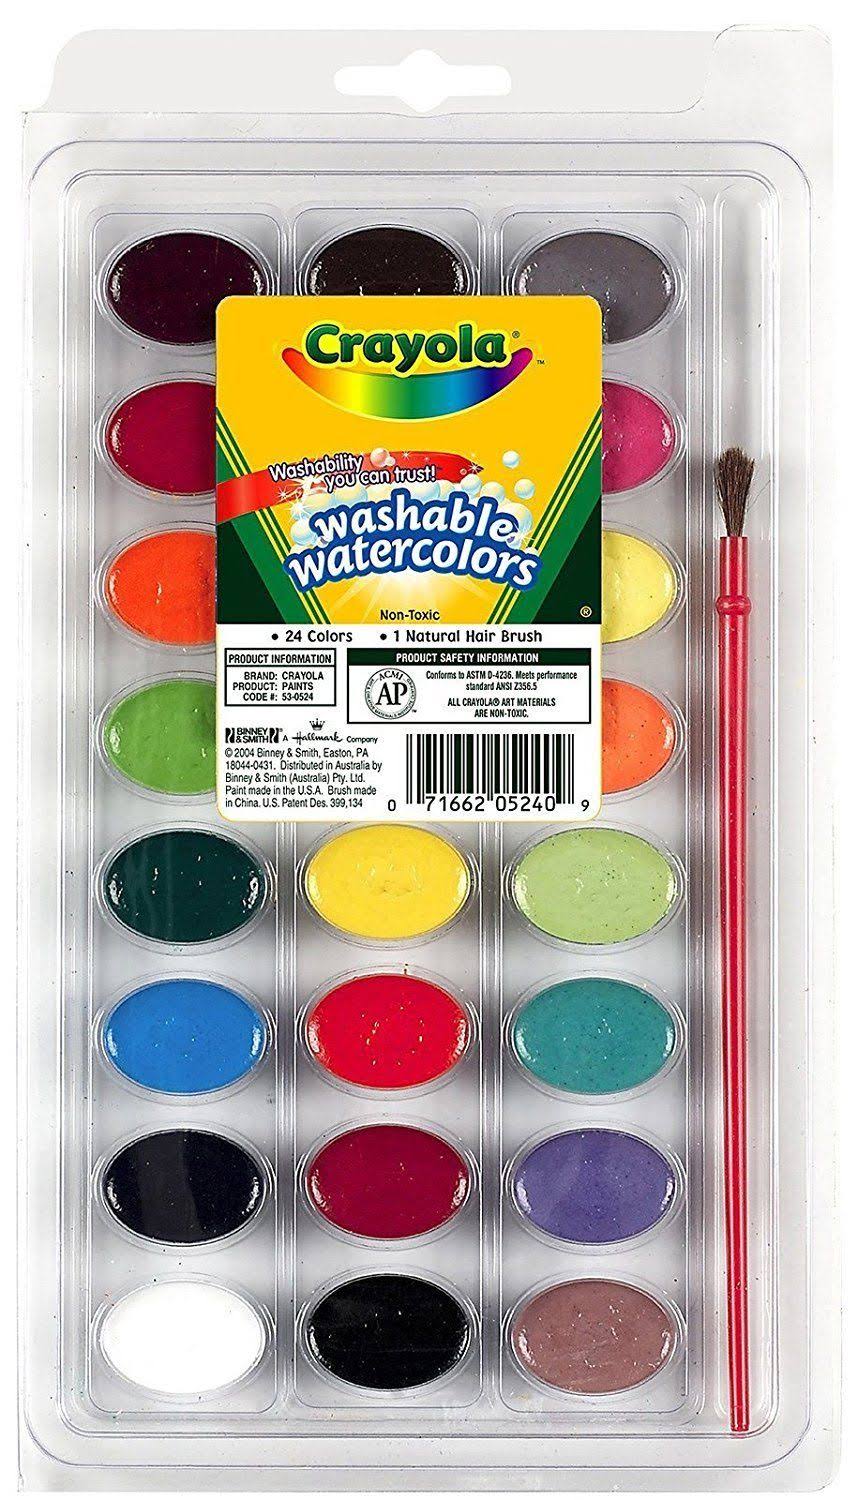 Crayola Washable Watercolors - 24 Pack